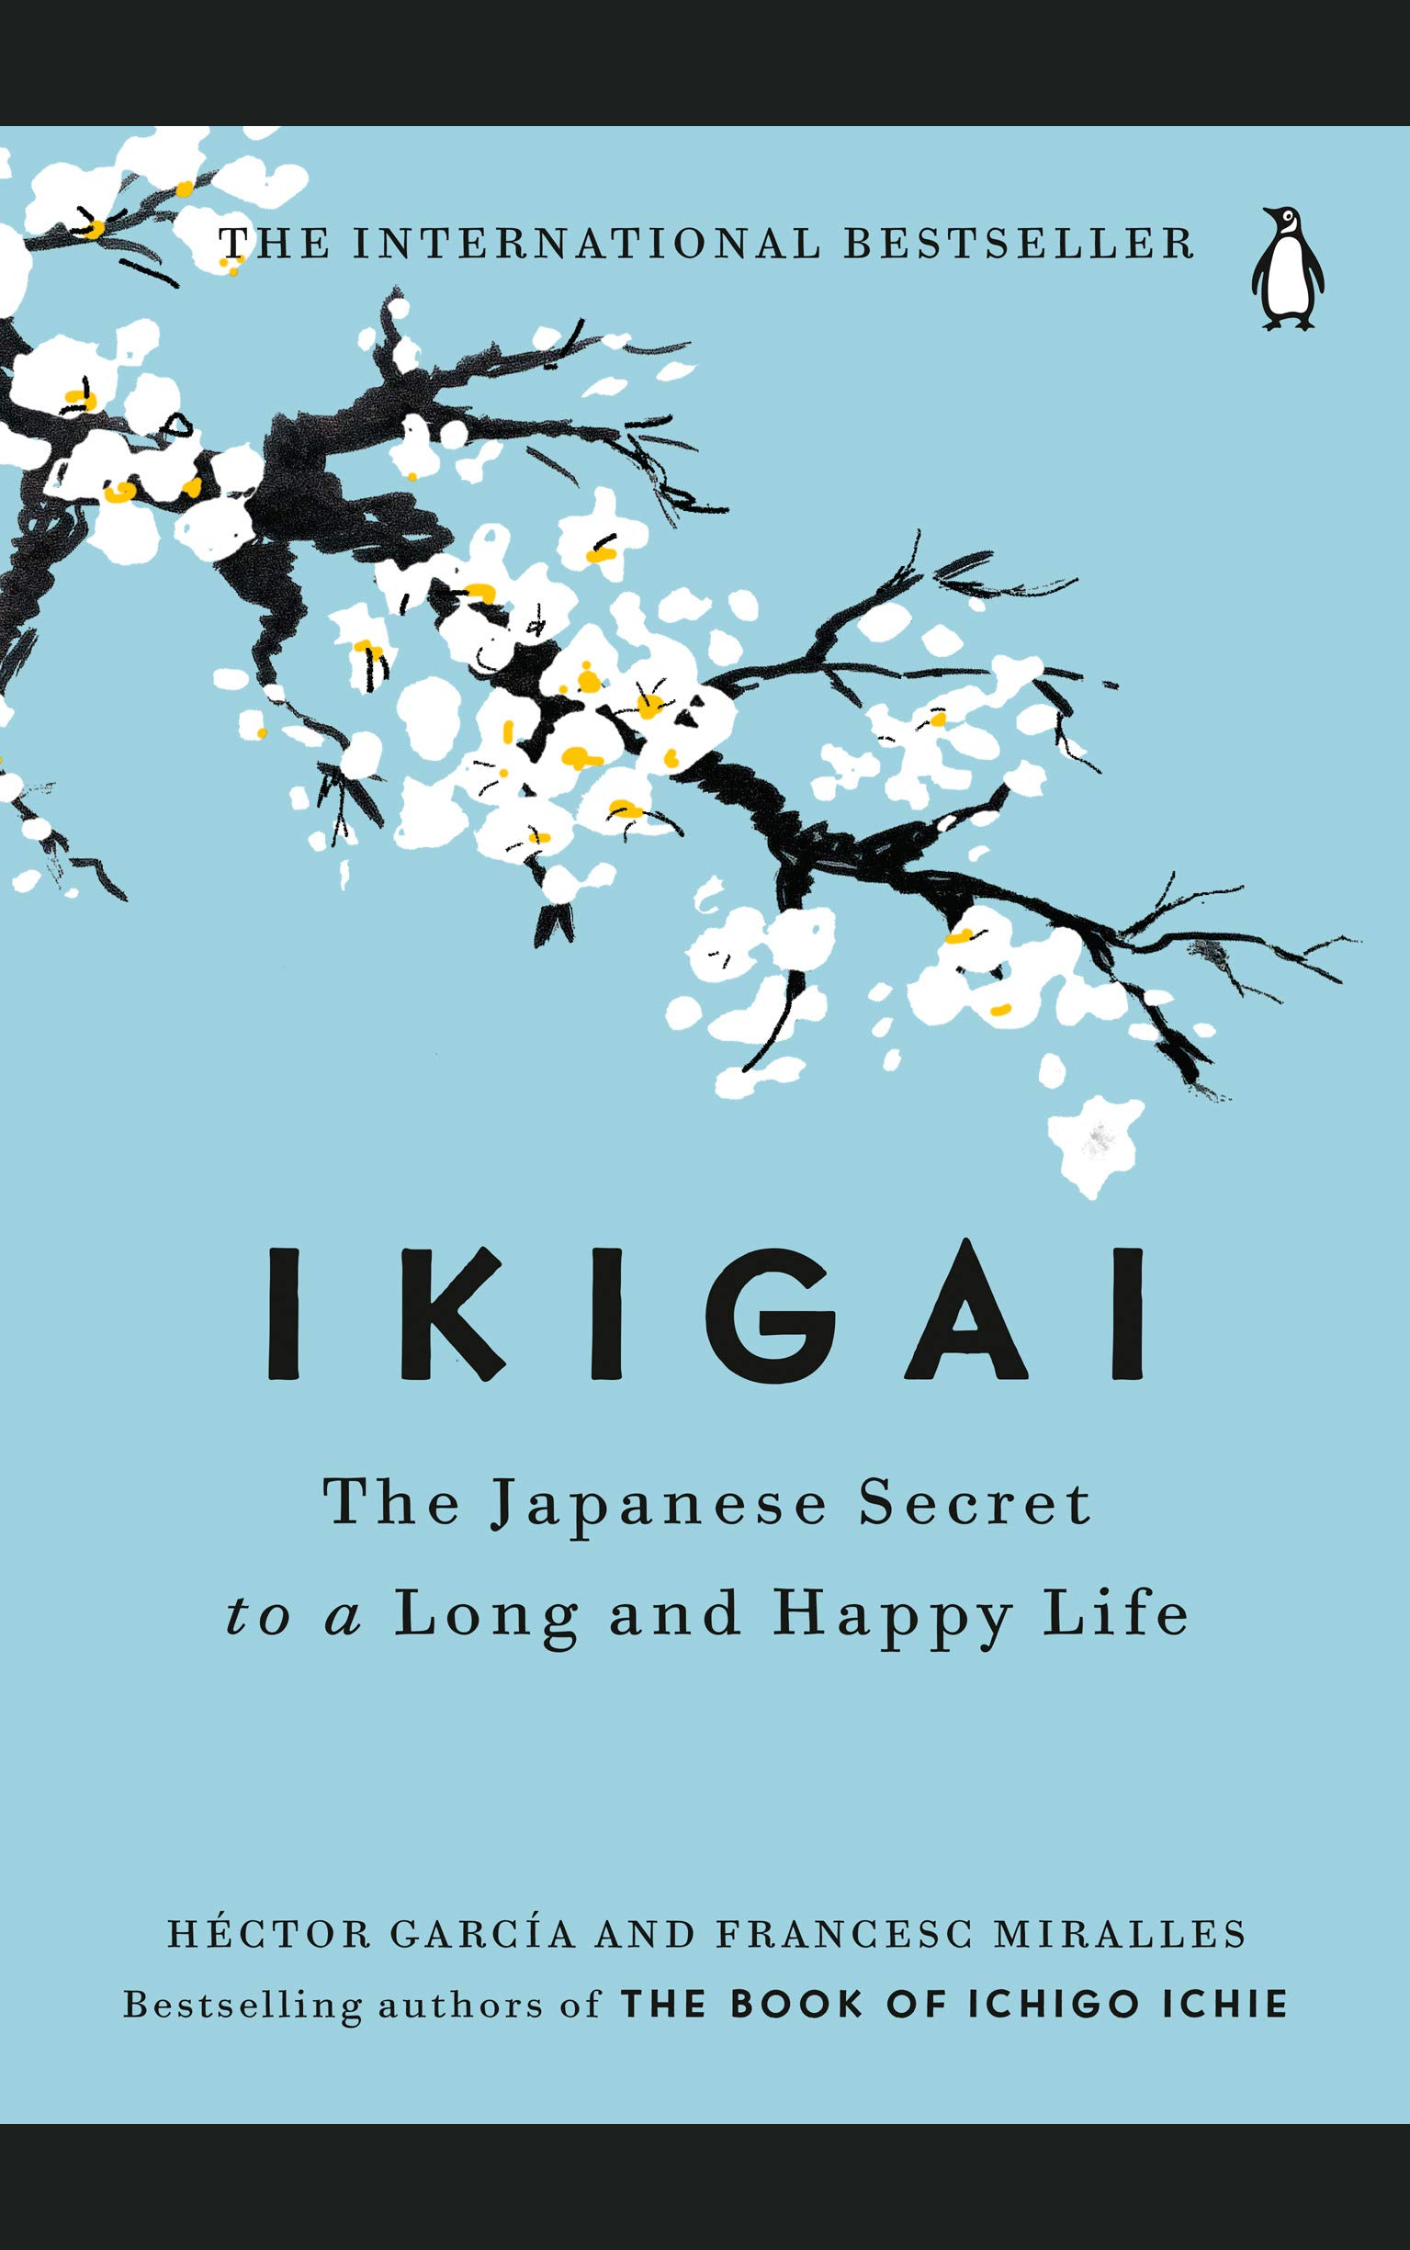 IKIGAI :The Japanese Secret to a Long and Happy Life  by HECTOR GARCIA